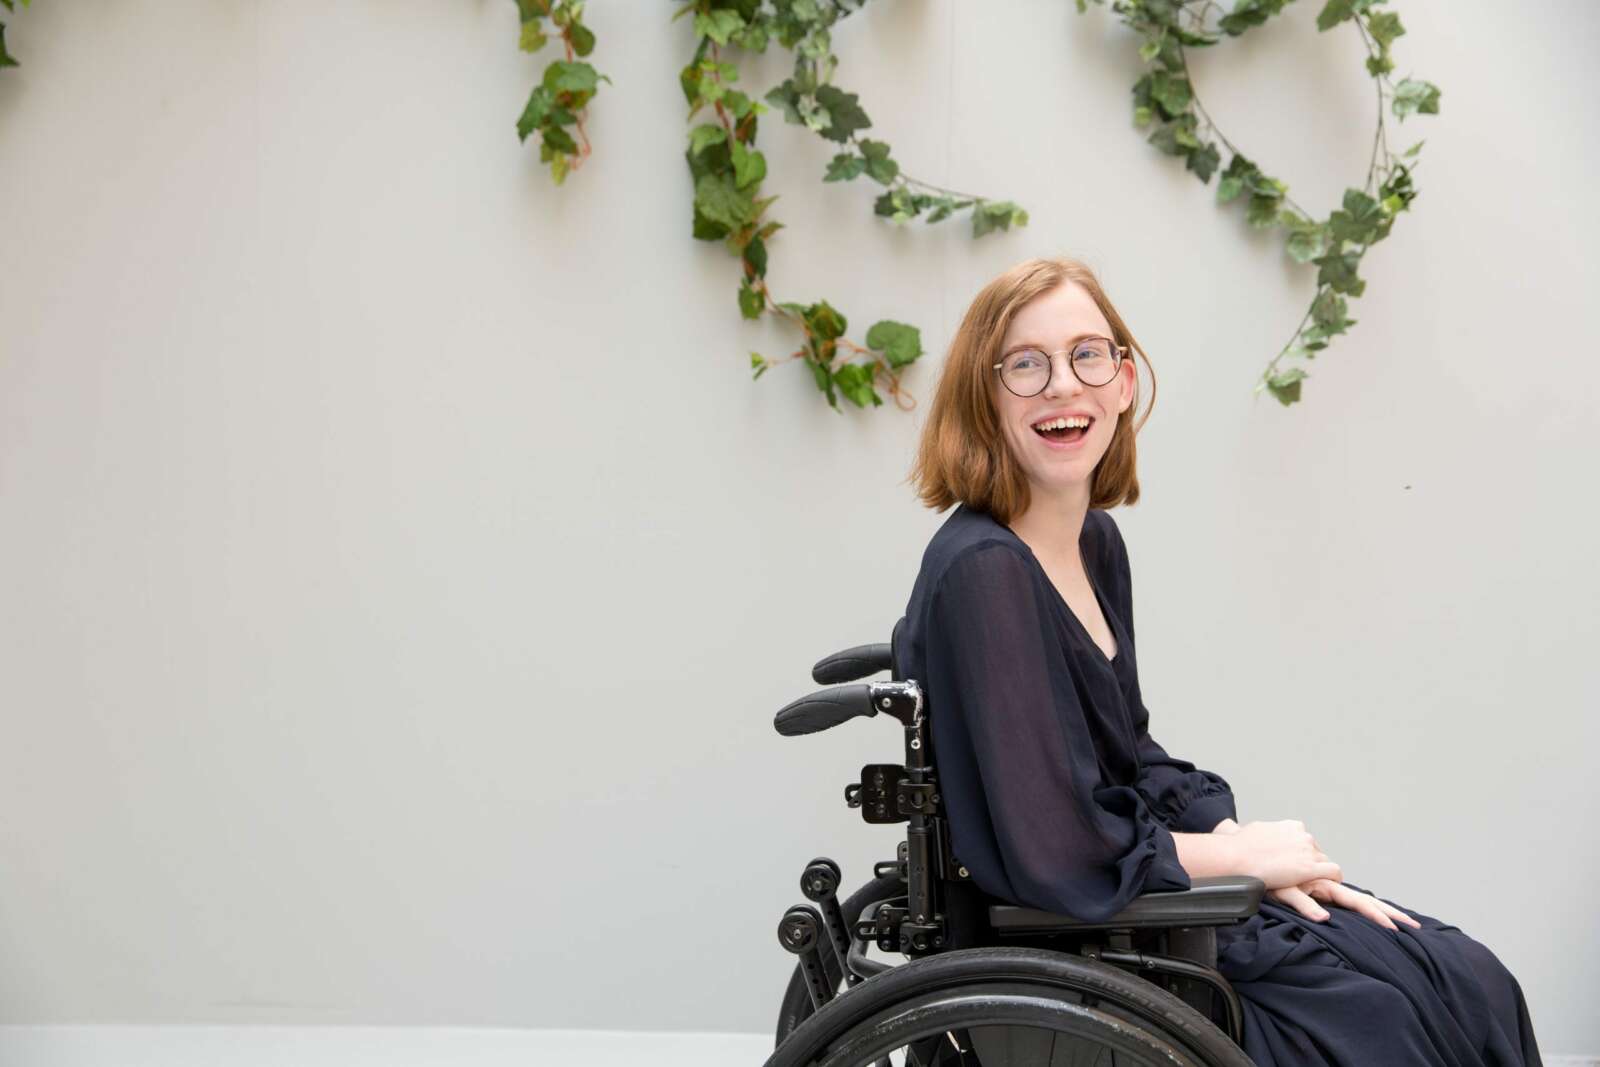 Woman wearing glasses laughs in navy dress, in front of green foliage. she is using a wheelchair